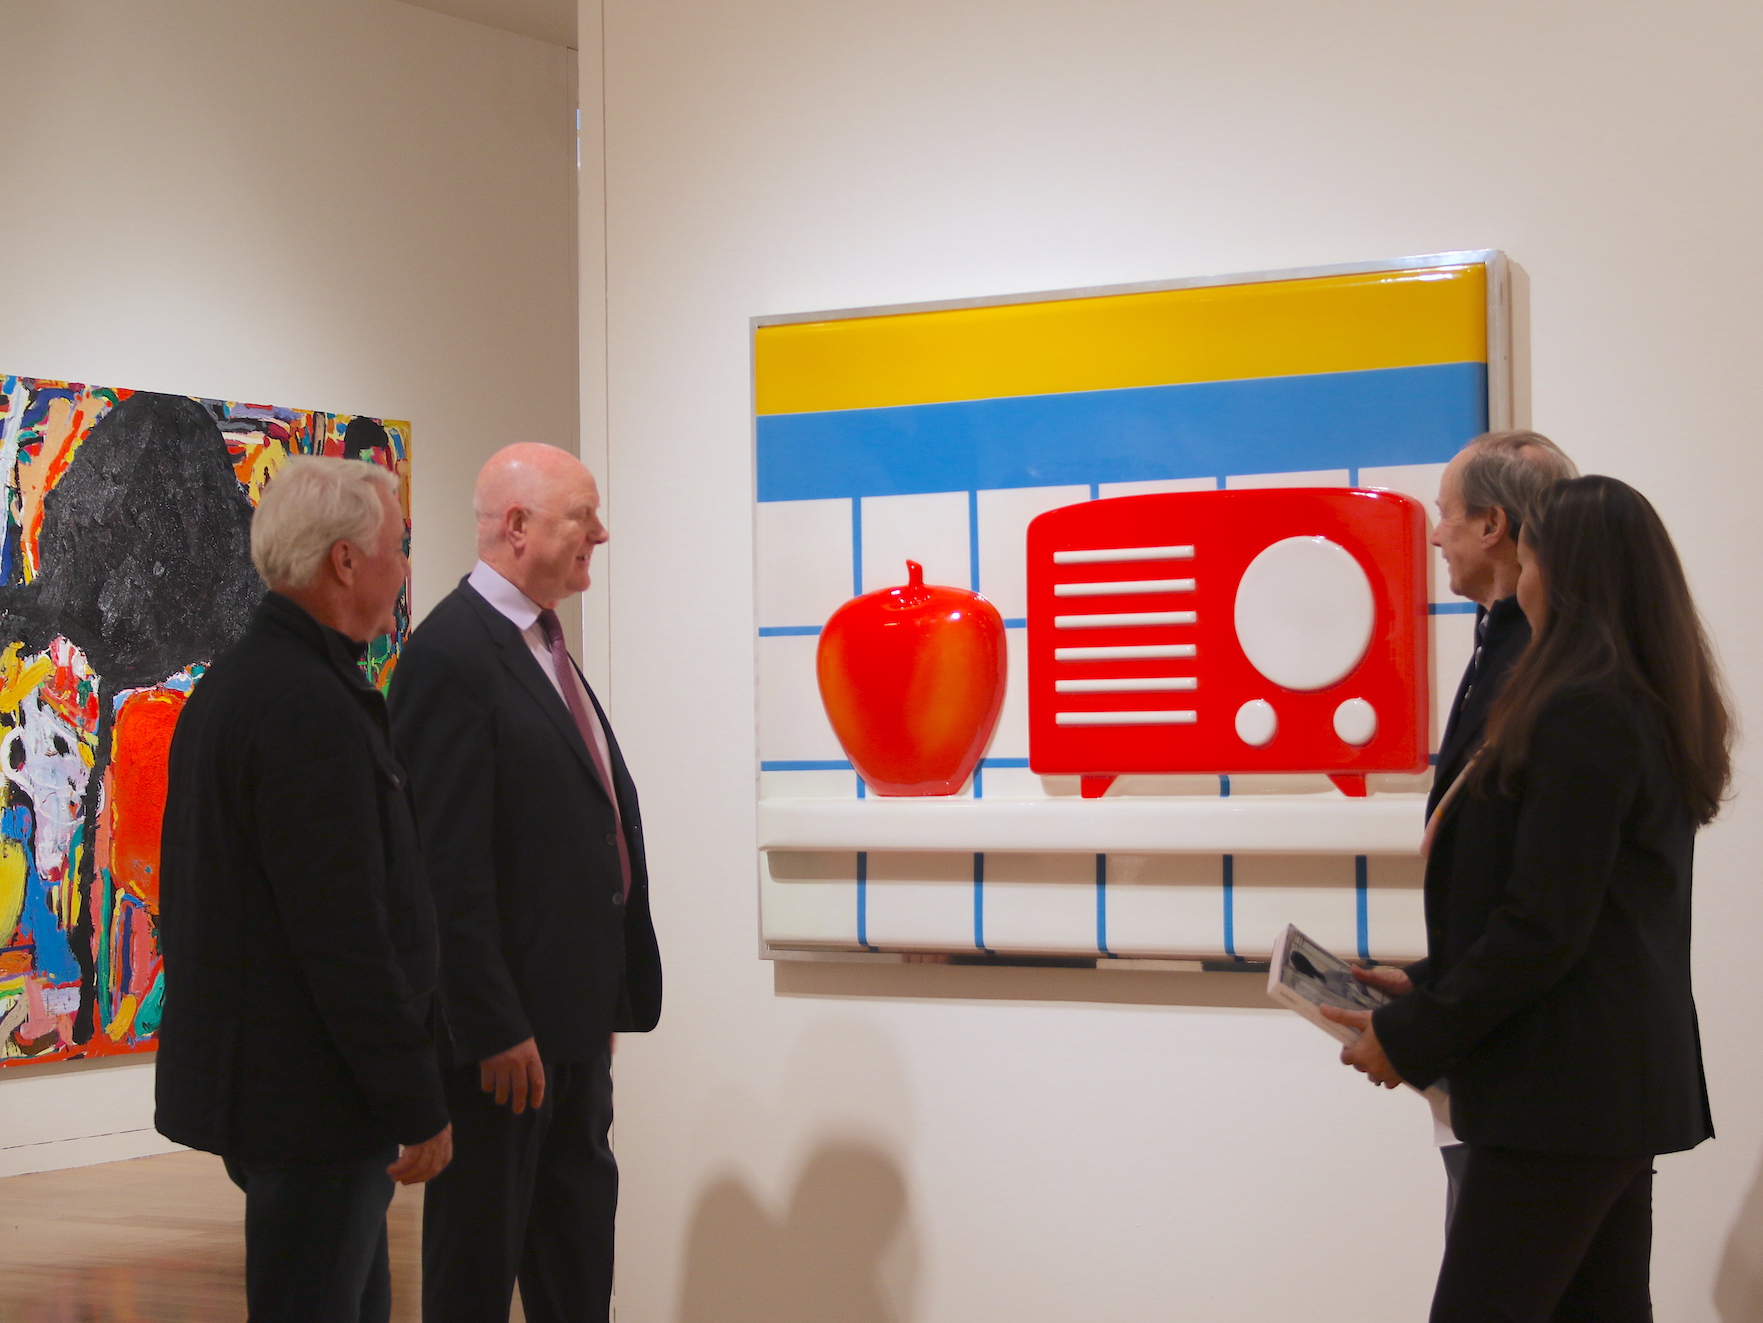 Ray, Sandra Safta Waterhouse, and clients in front of 2D artwork with large red apple and radio against tile background.